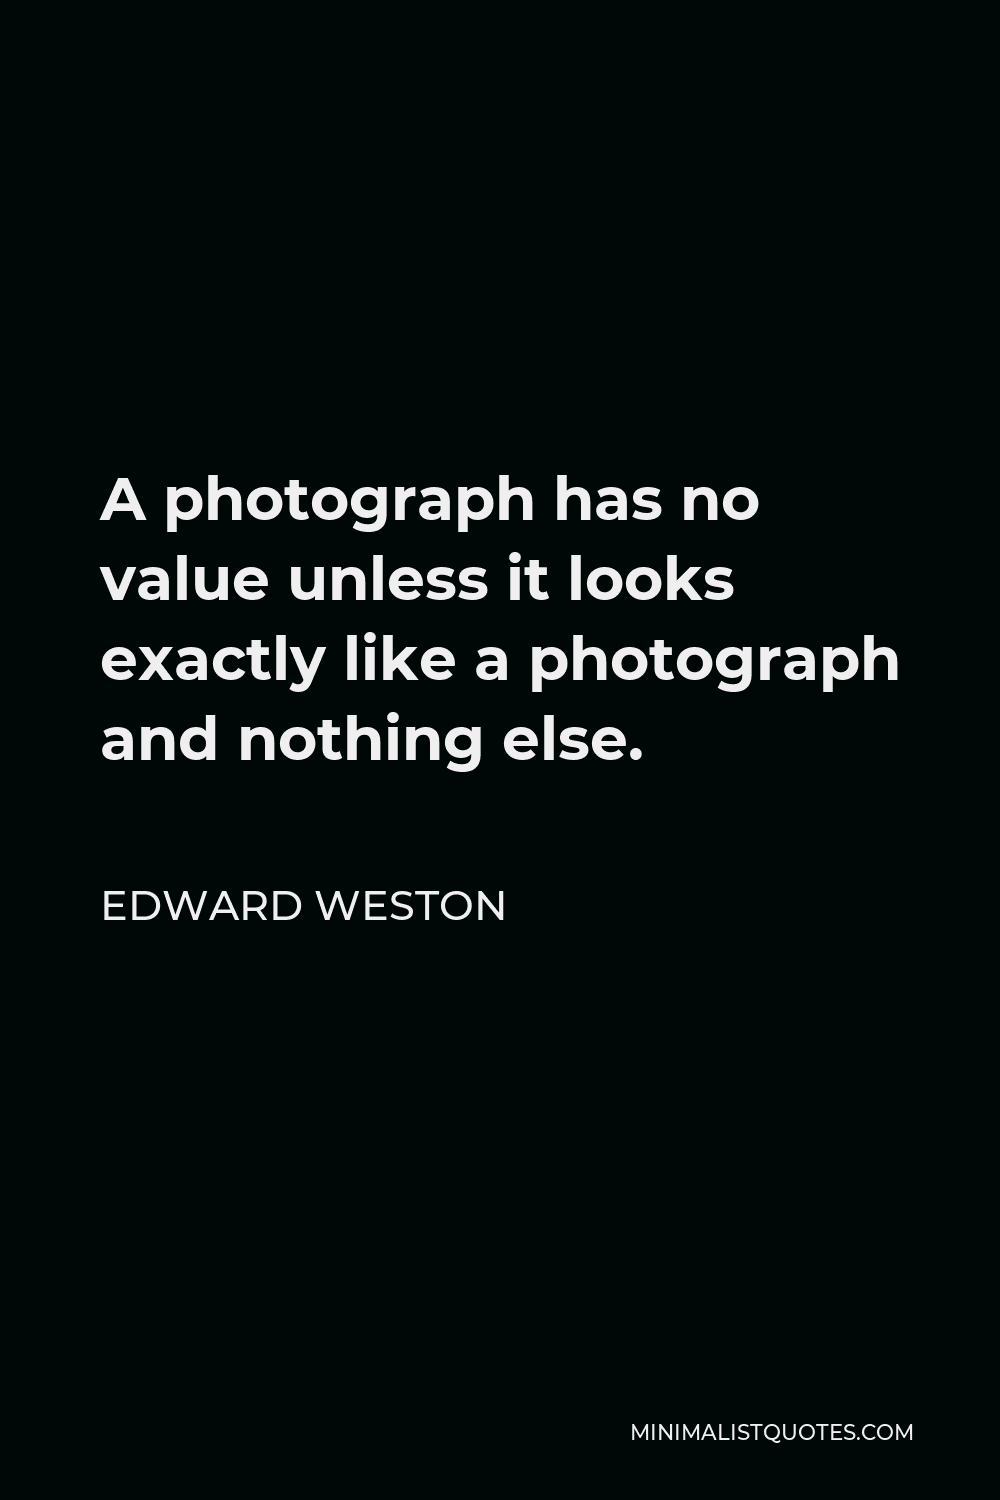 Edward Weston Quote - A photograph has no value unless it looks exactly like a photograph and nothing else.